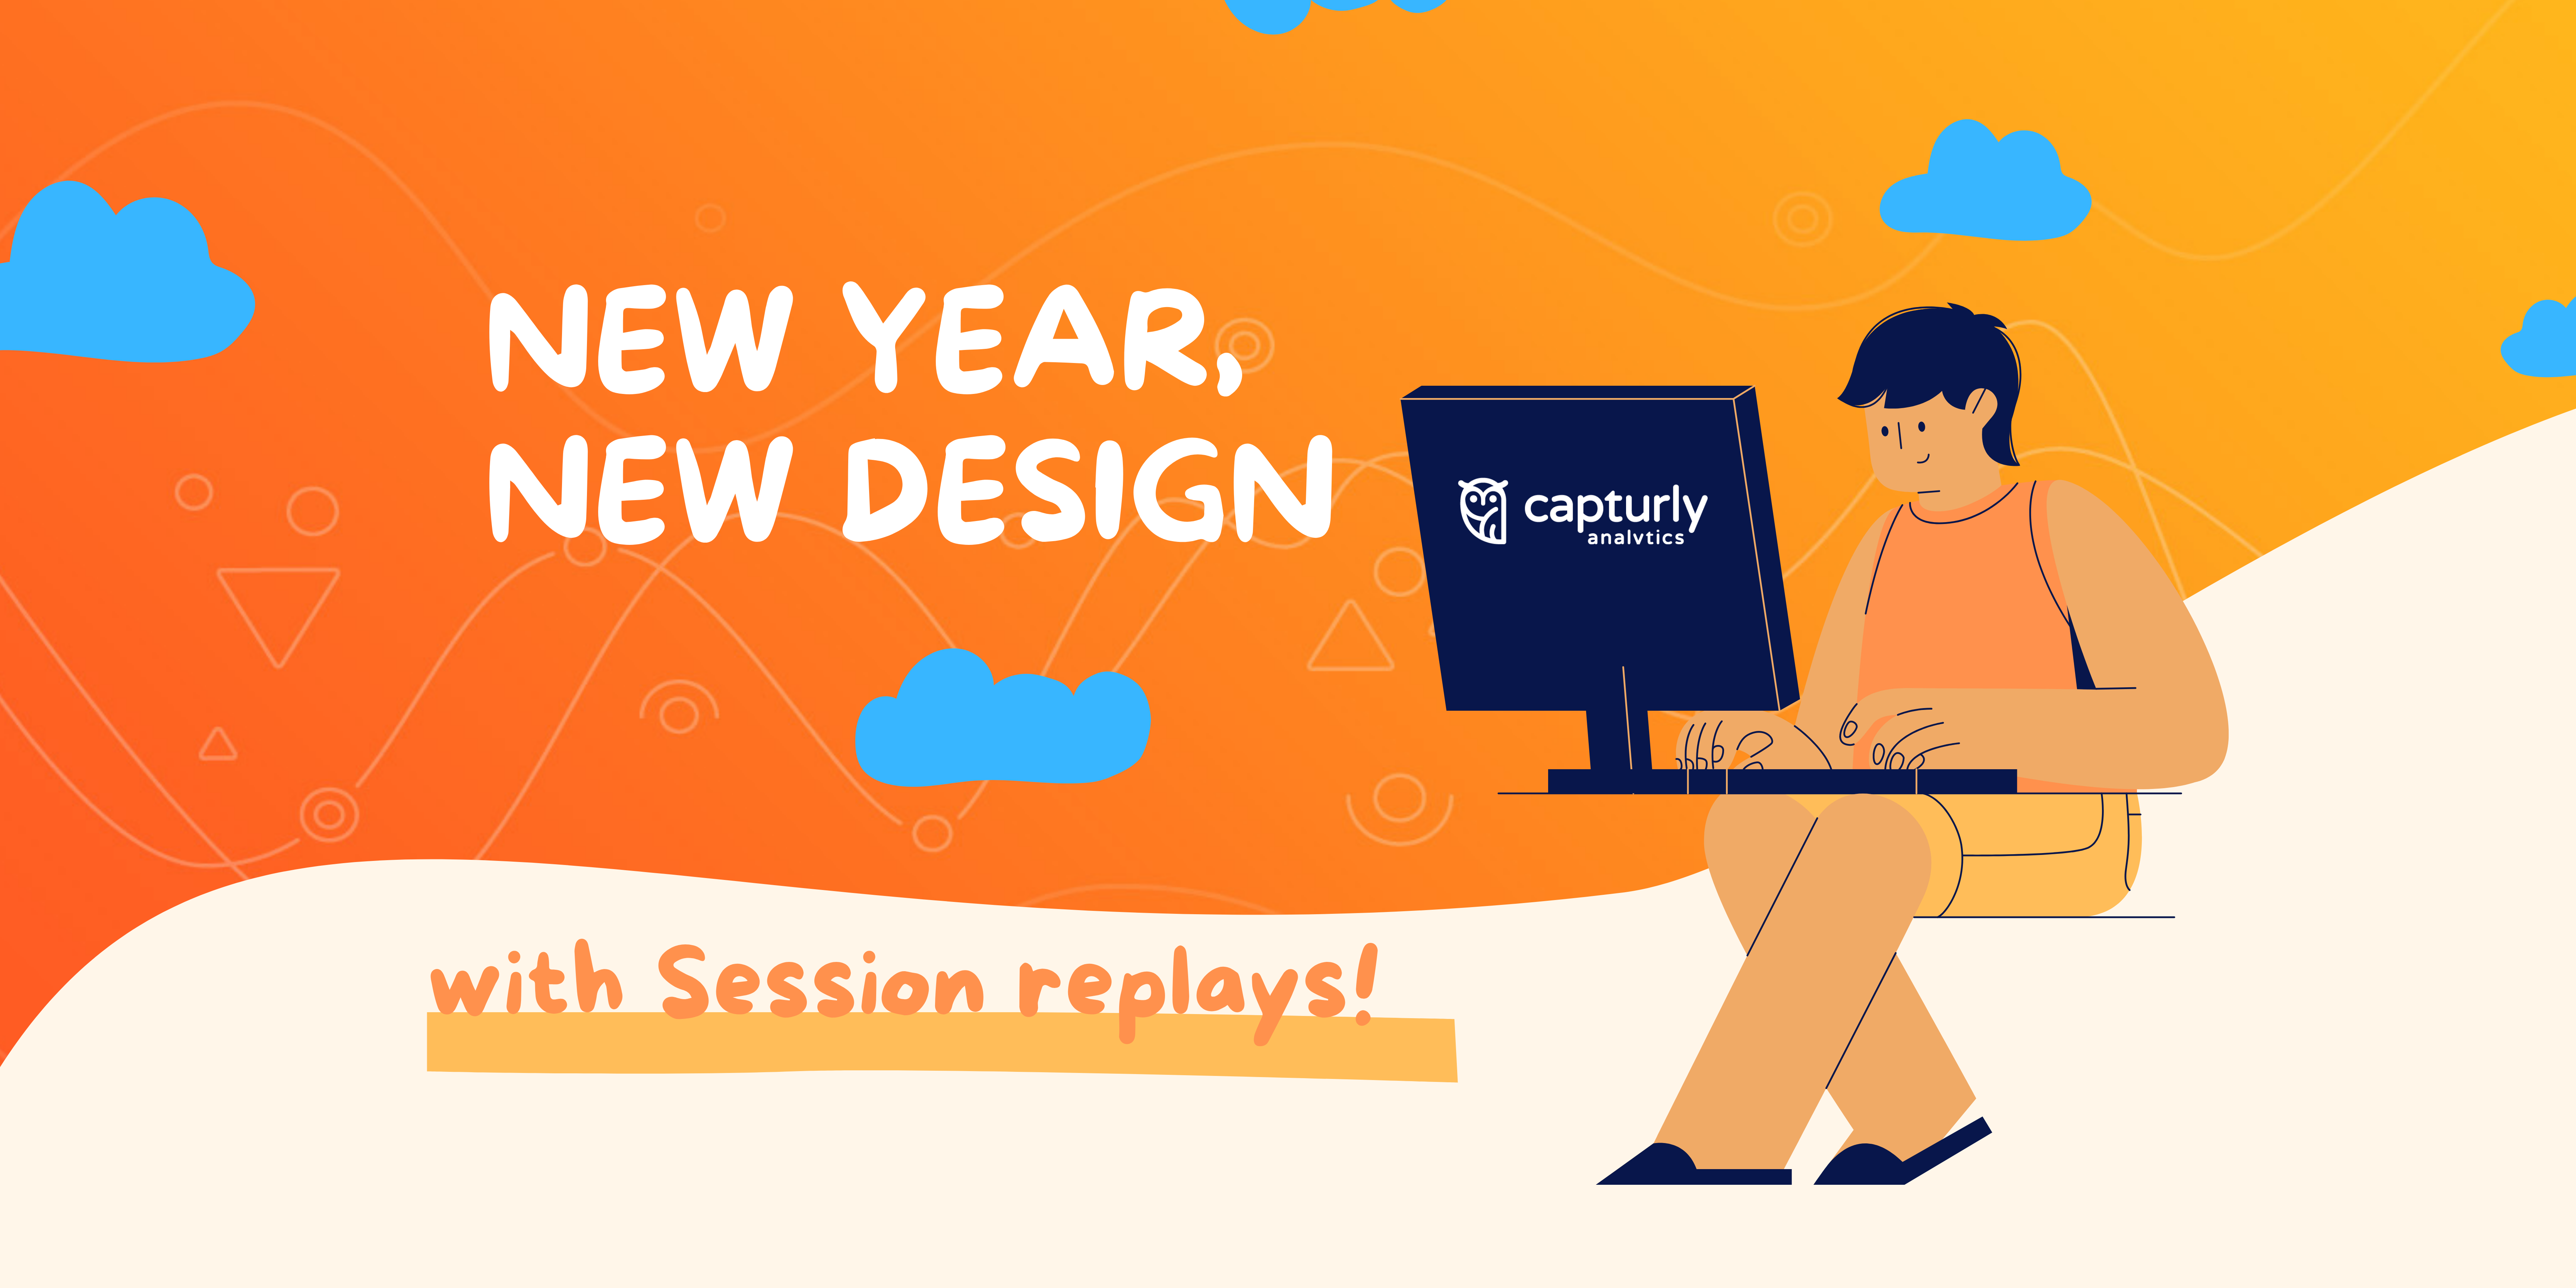 New Year New Design with Session Replays